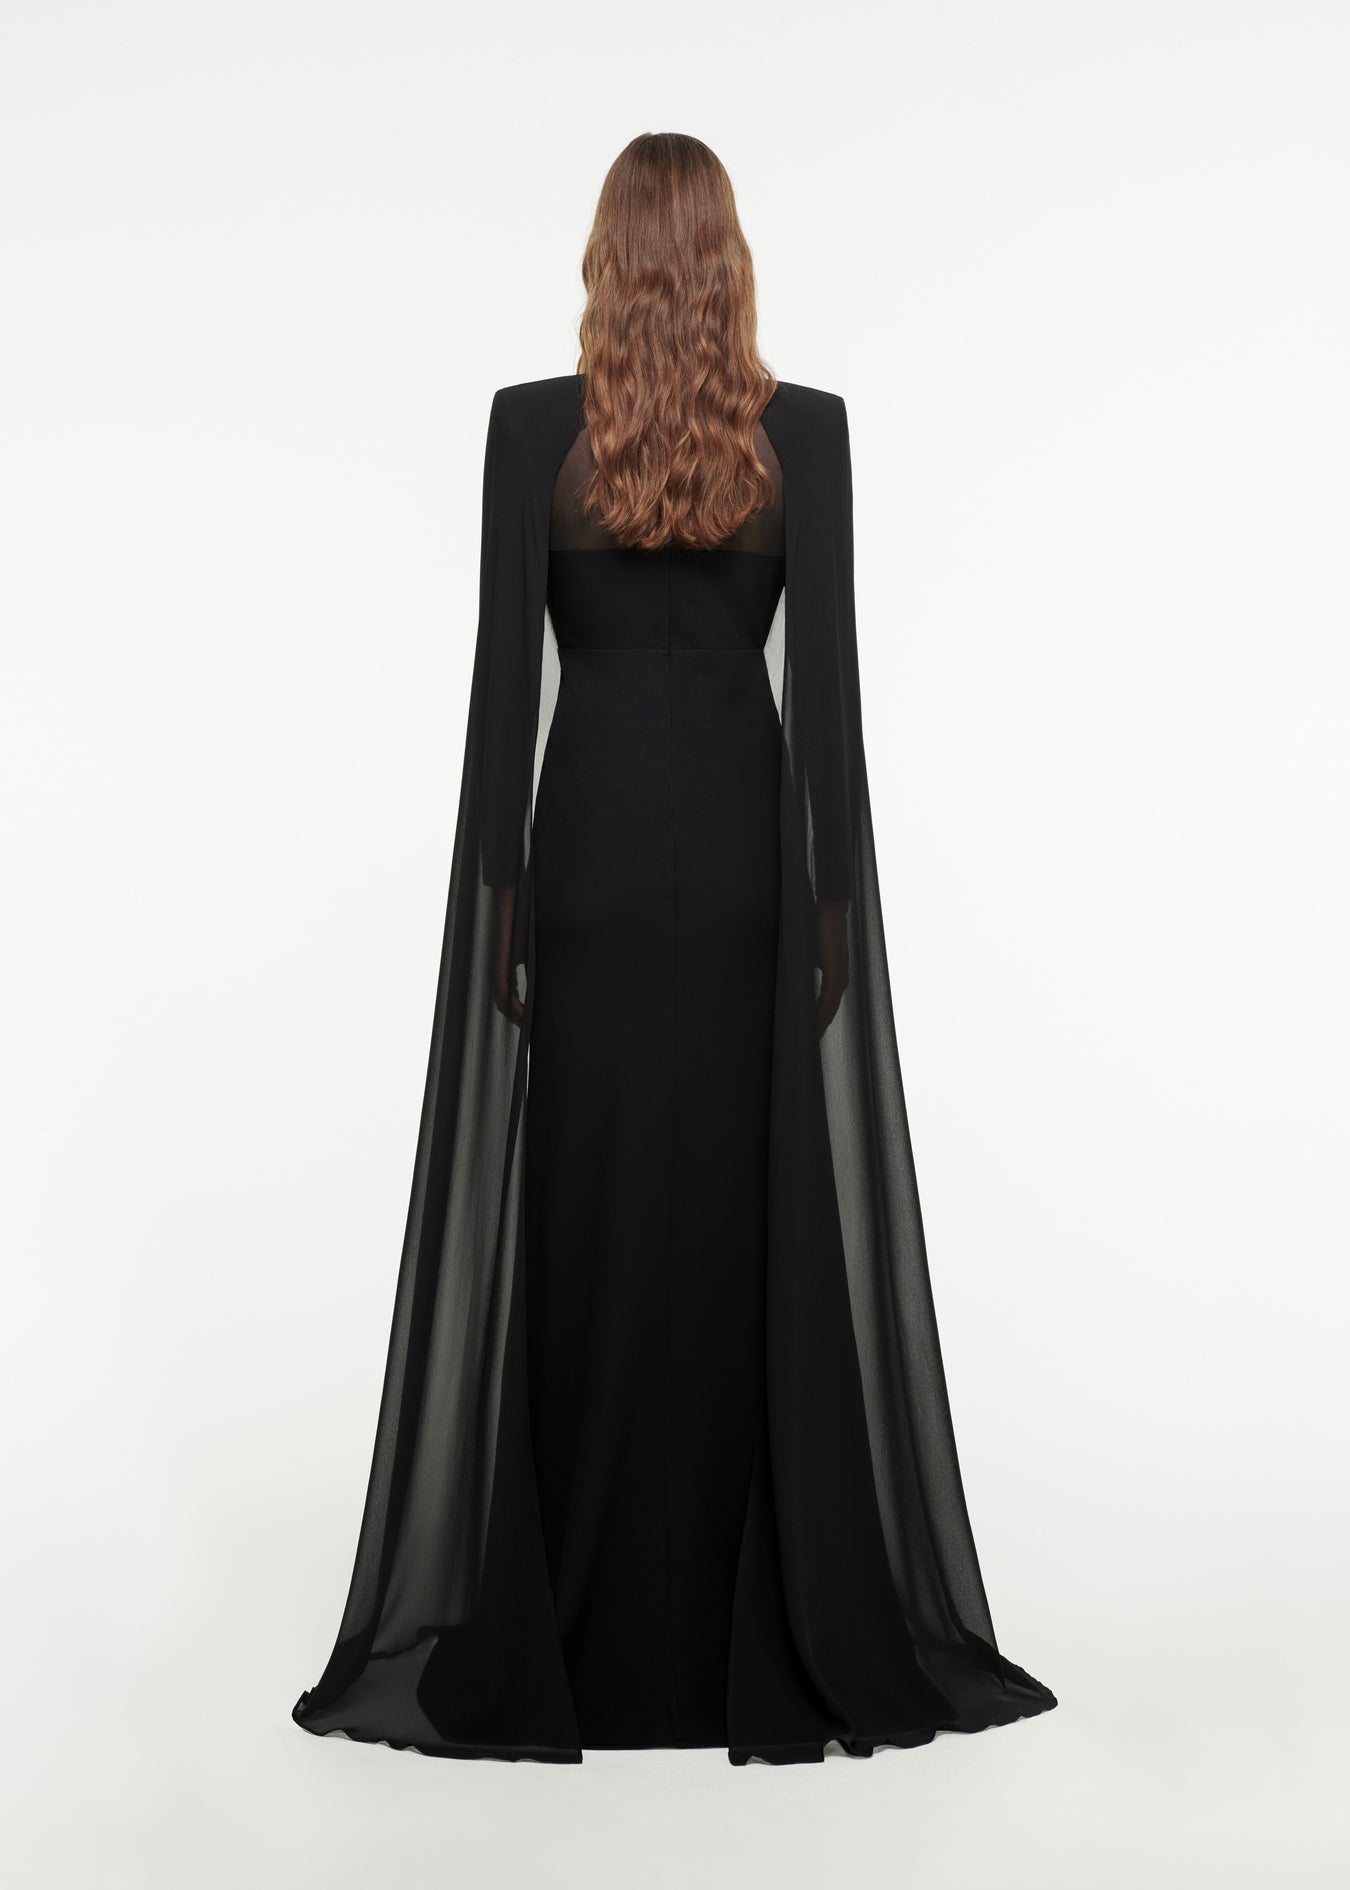 The back of a woman wearing the Long Sleeve Cape Gown in Black